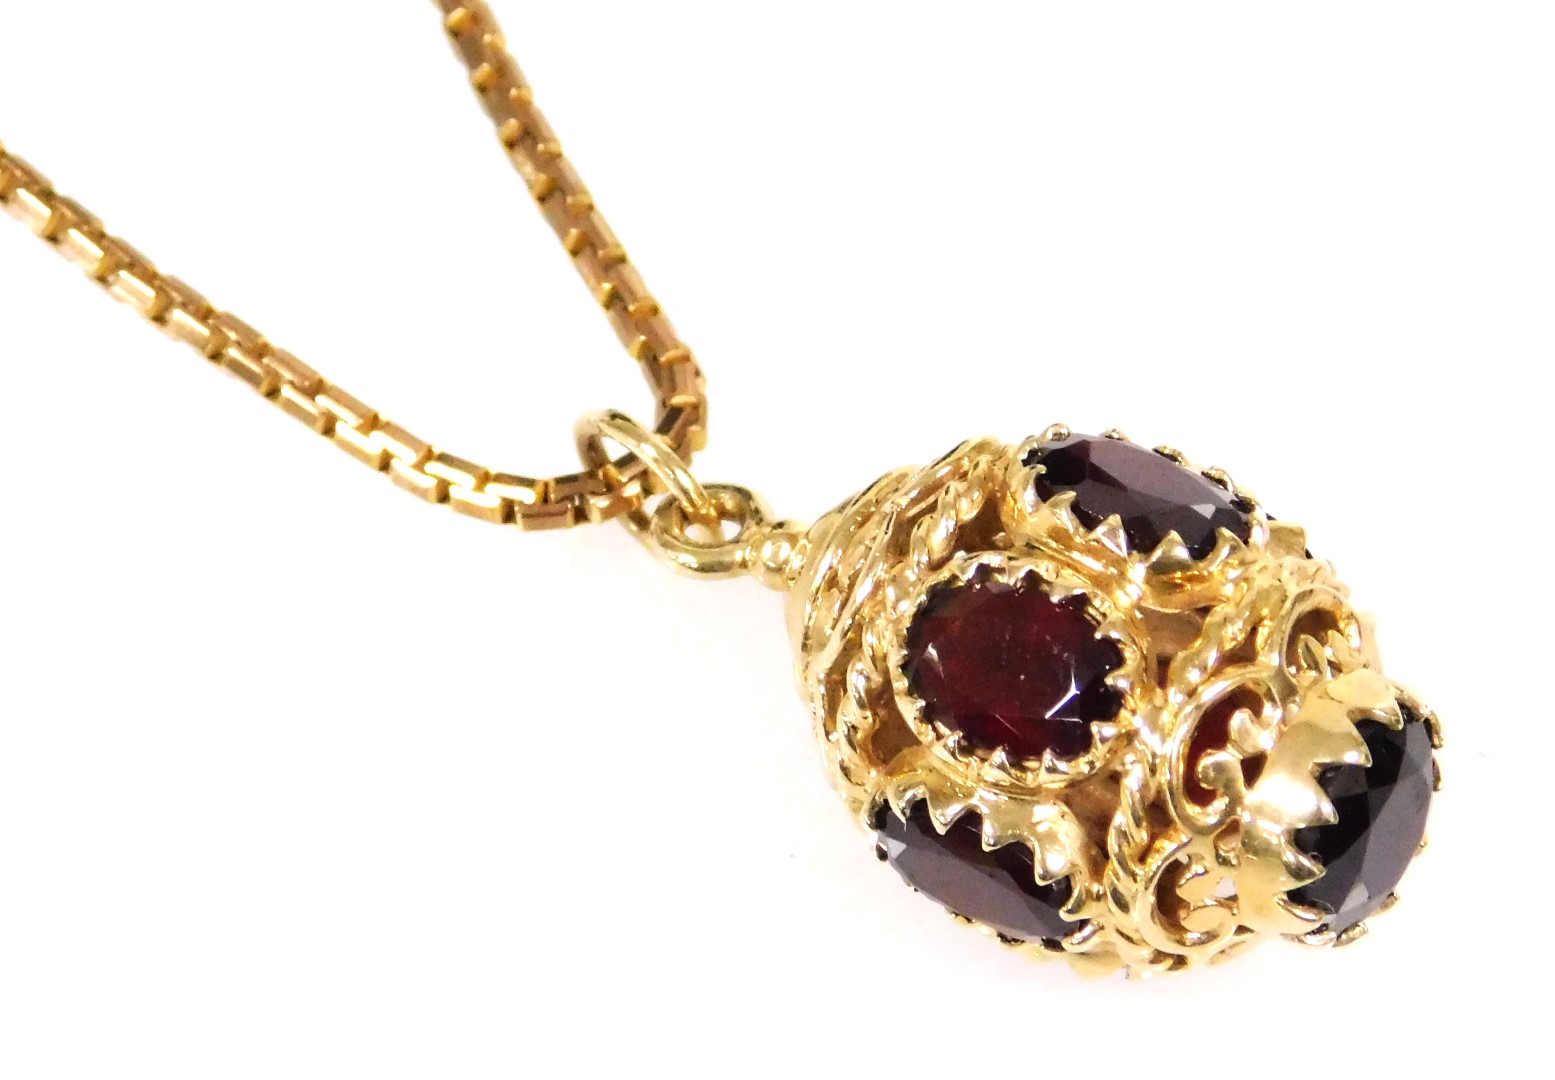 A 9ct gold and garnet pendant, of Turkish lantern form, on a 9ct gold box link neck chain, with bolt